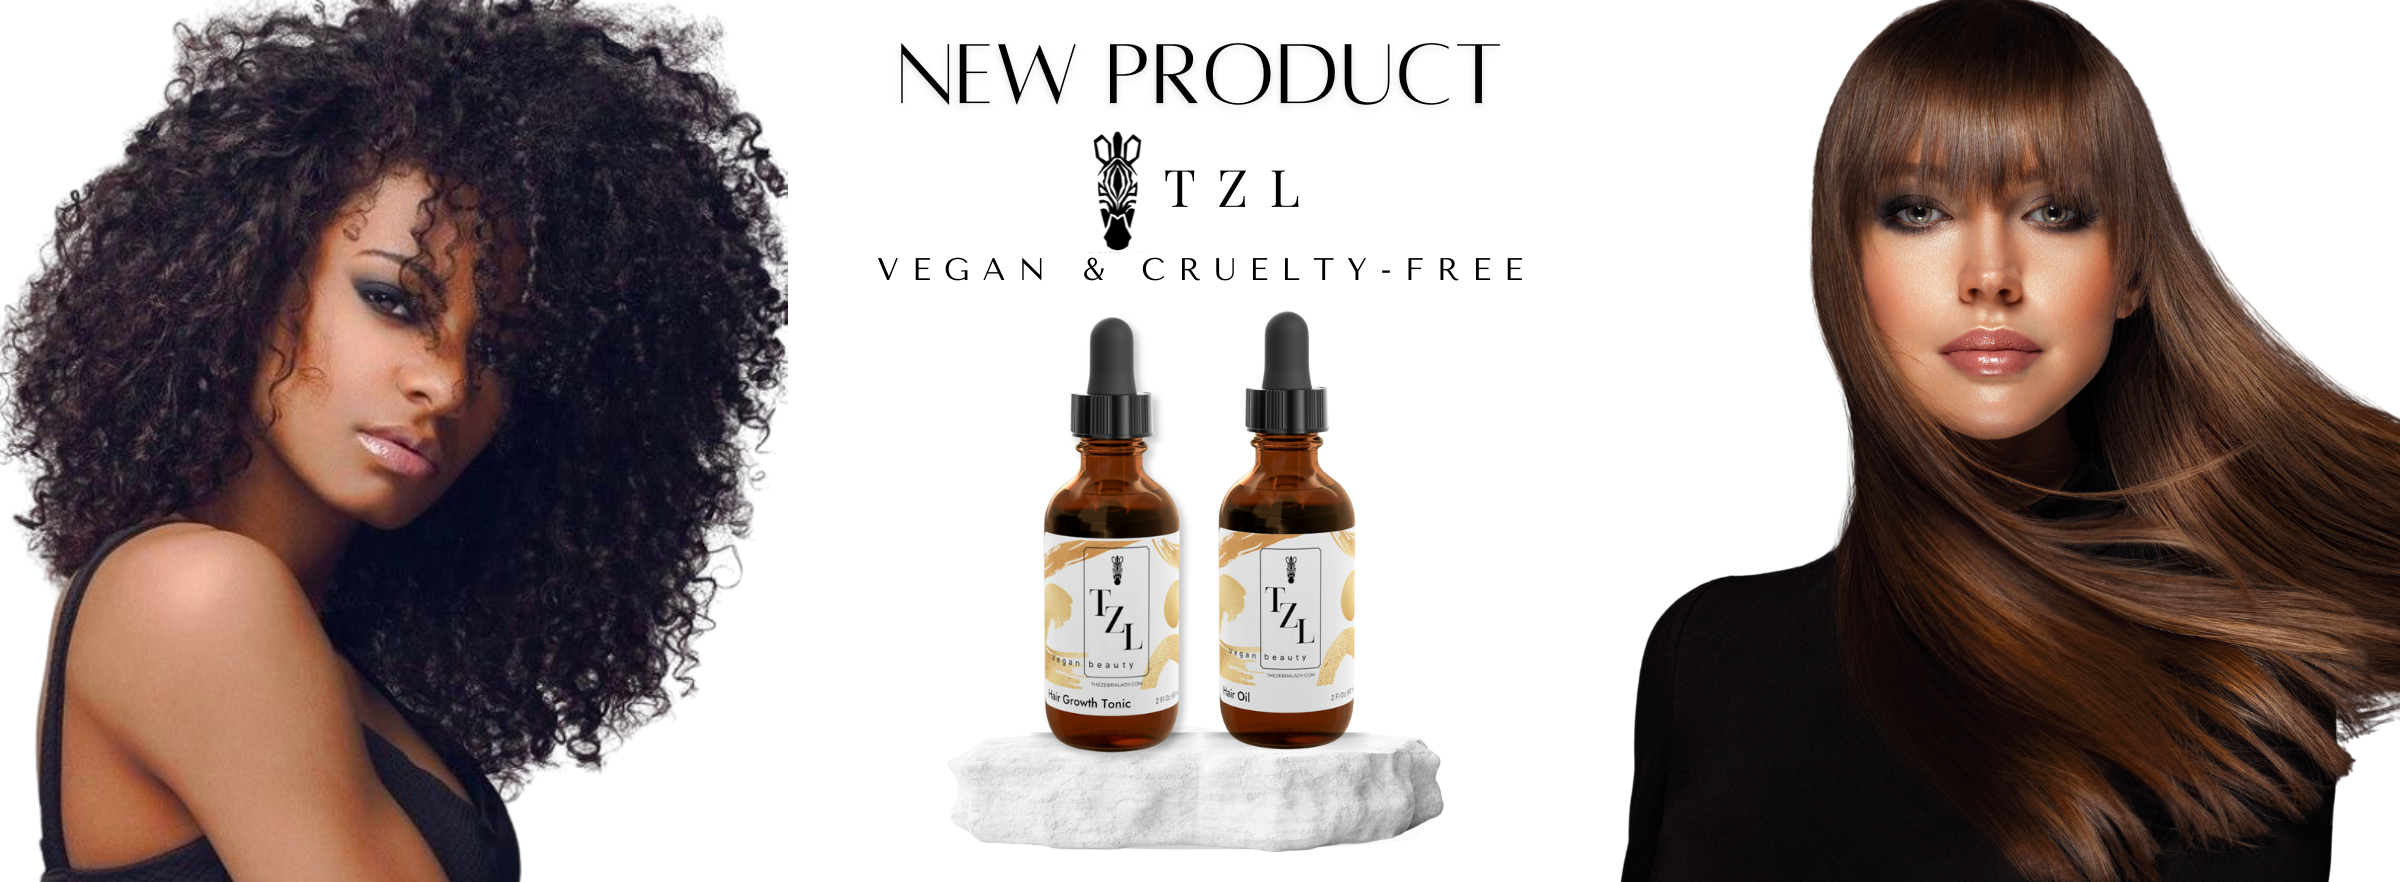 TZL vegan Hair oil and growth banner Thezebralady.com.png